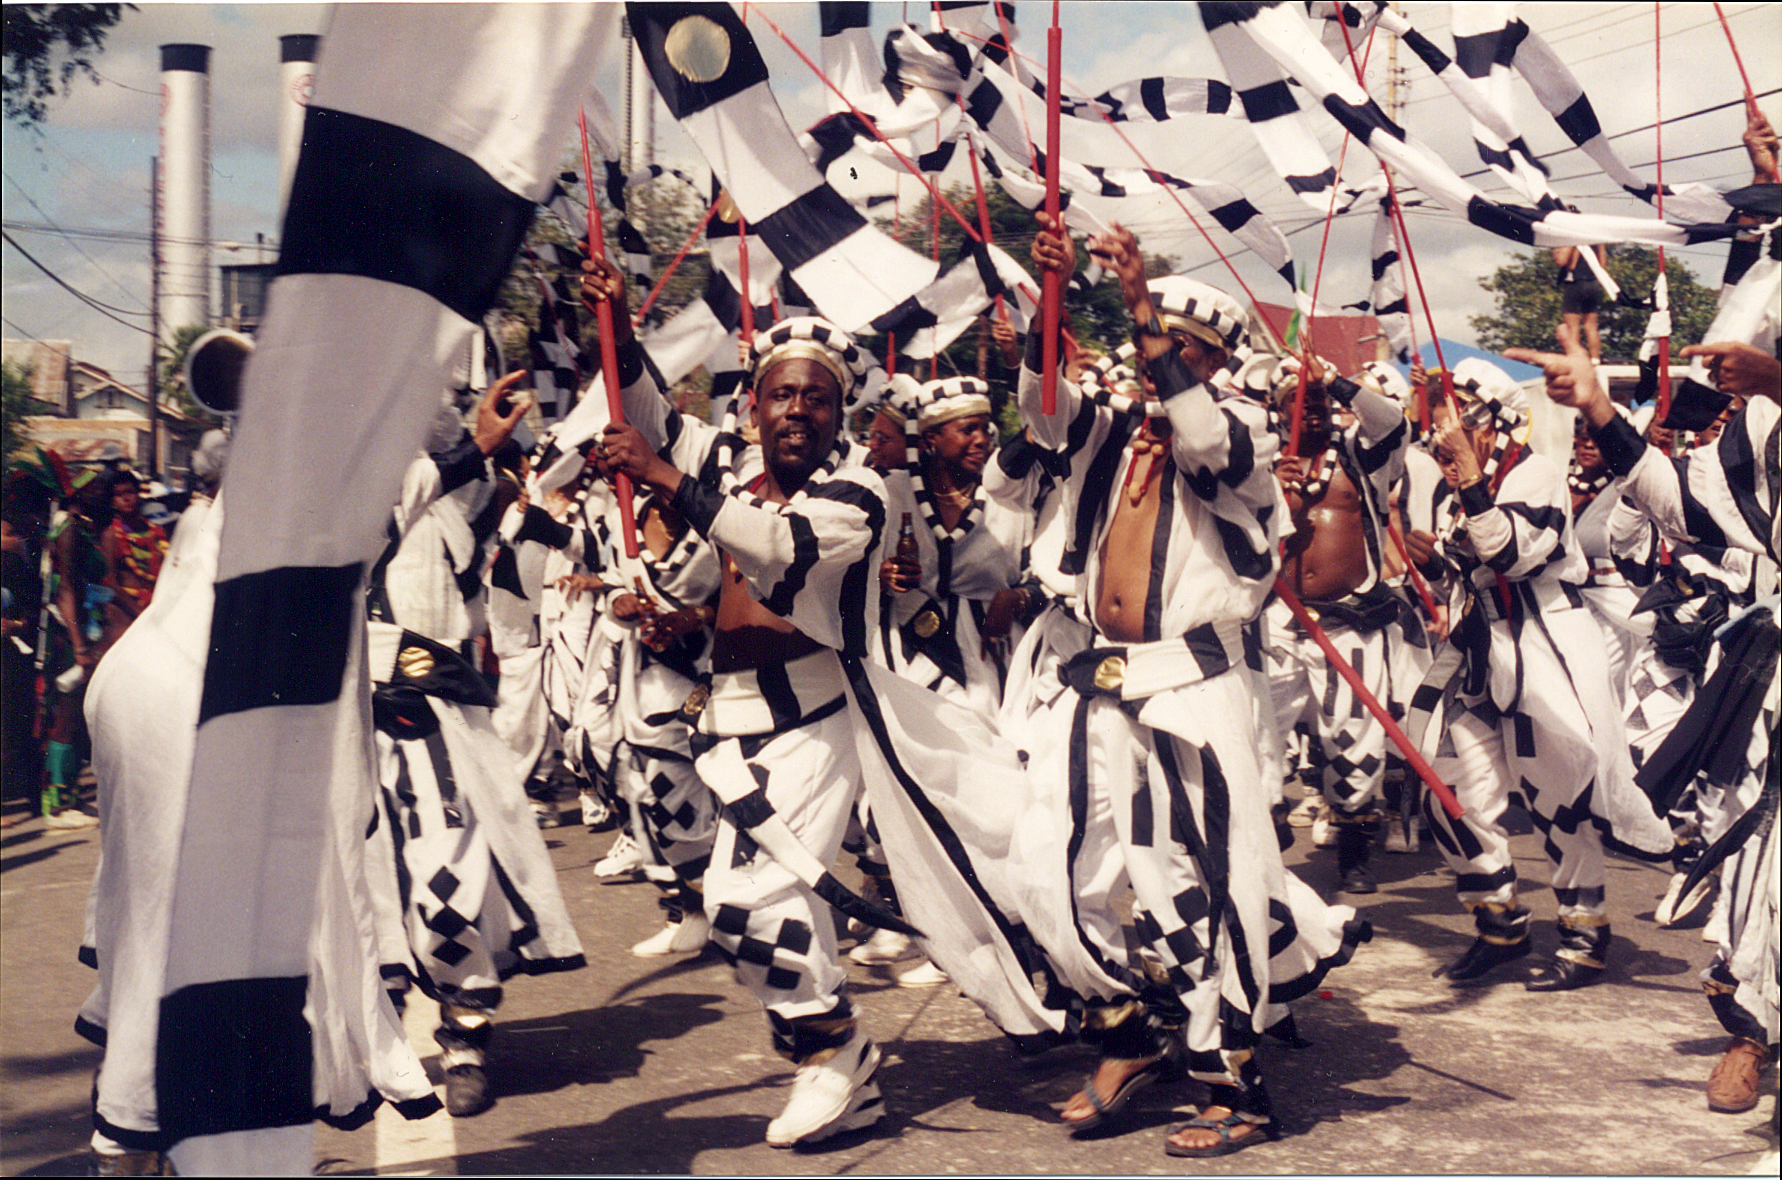 Figure 2.: Another Masquerade band on Carnival Tuesday, 1996. Photograph by the author.